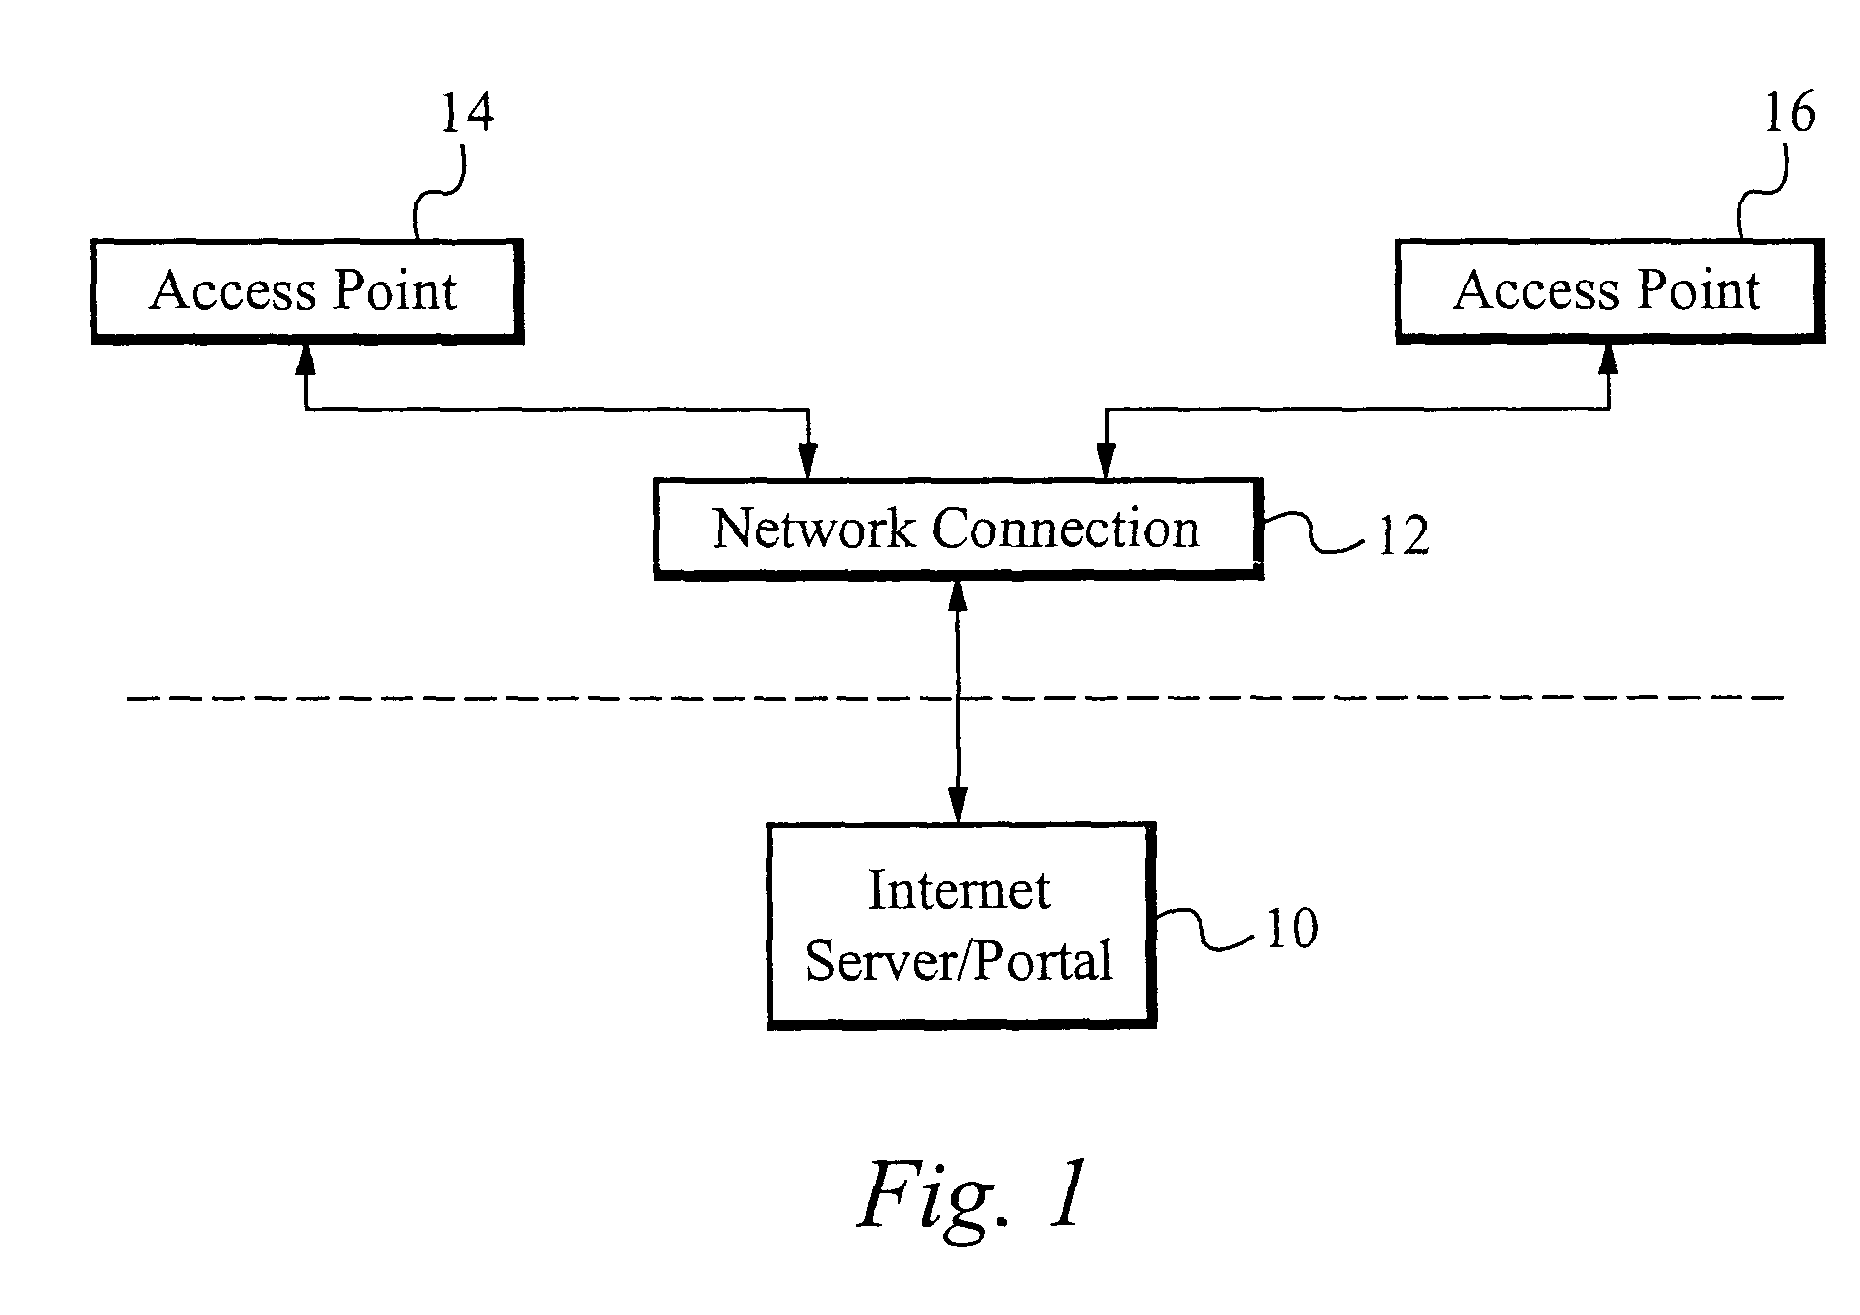 Method of and apparatus for providing localized information from an internet server or portal to user without requiring user to enter location